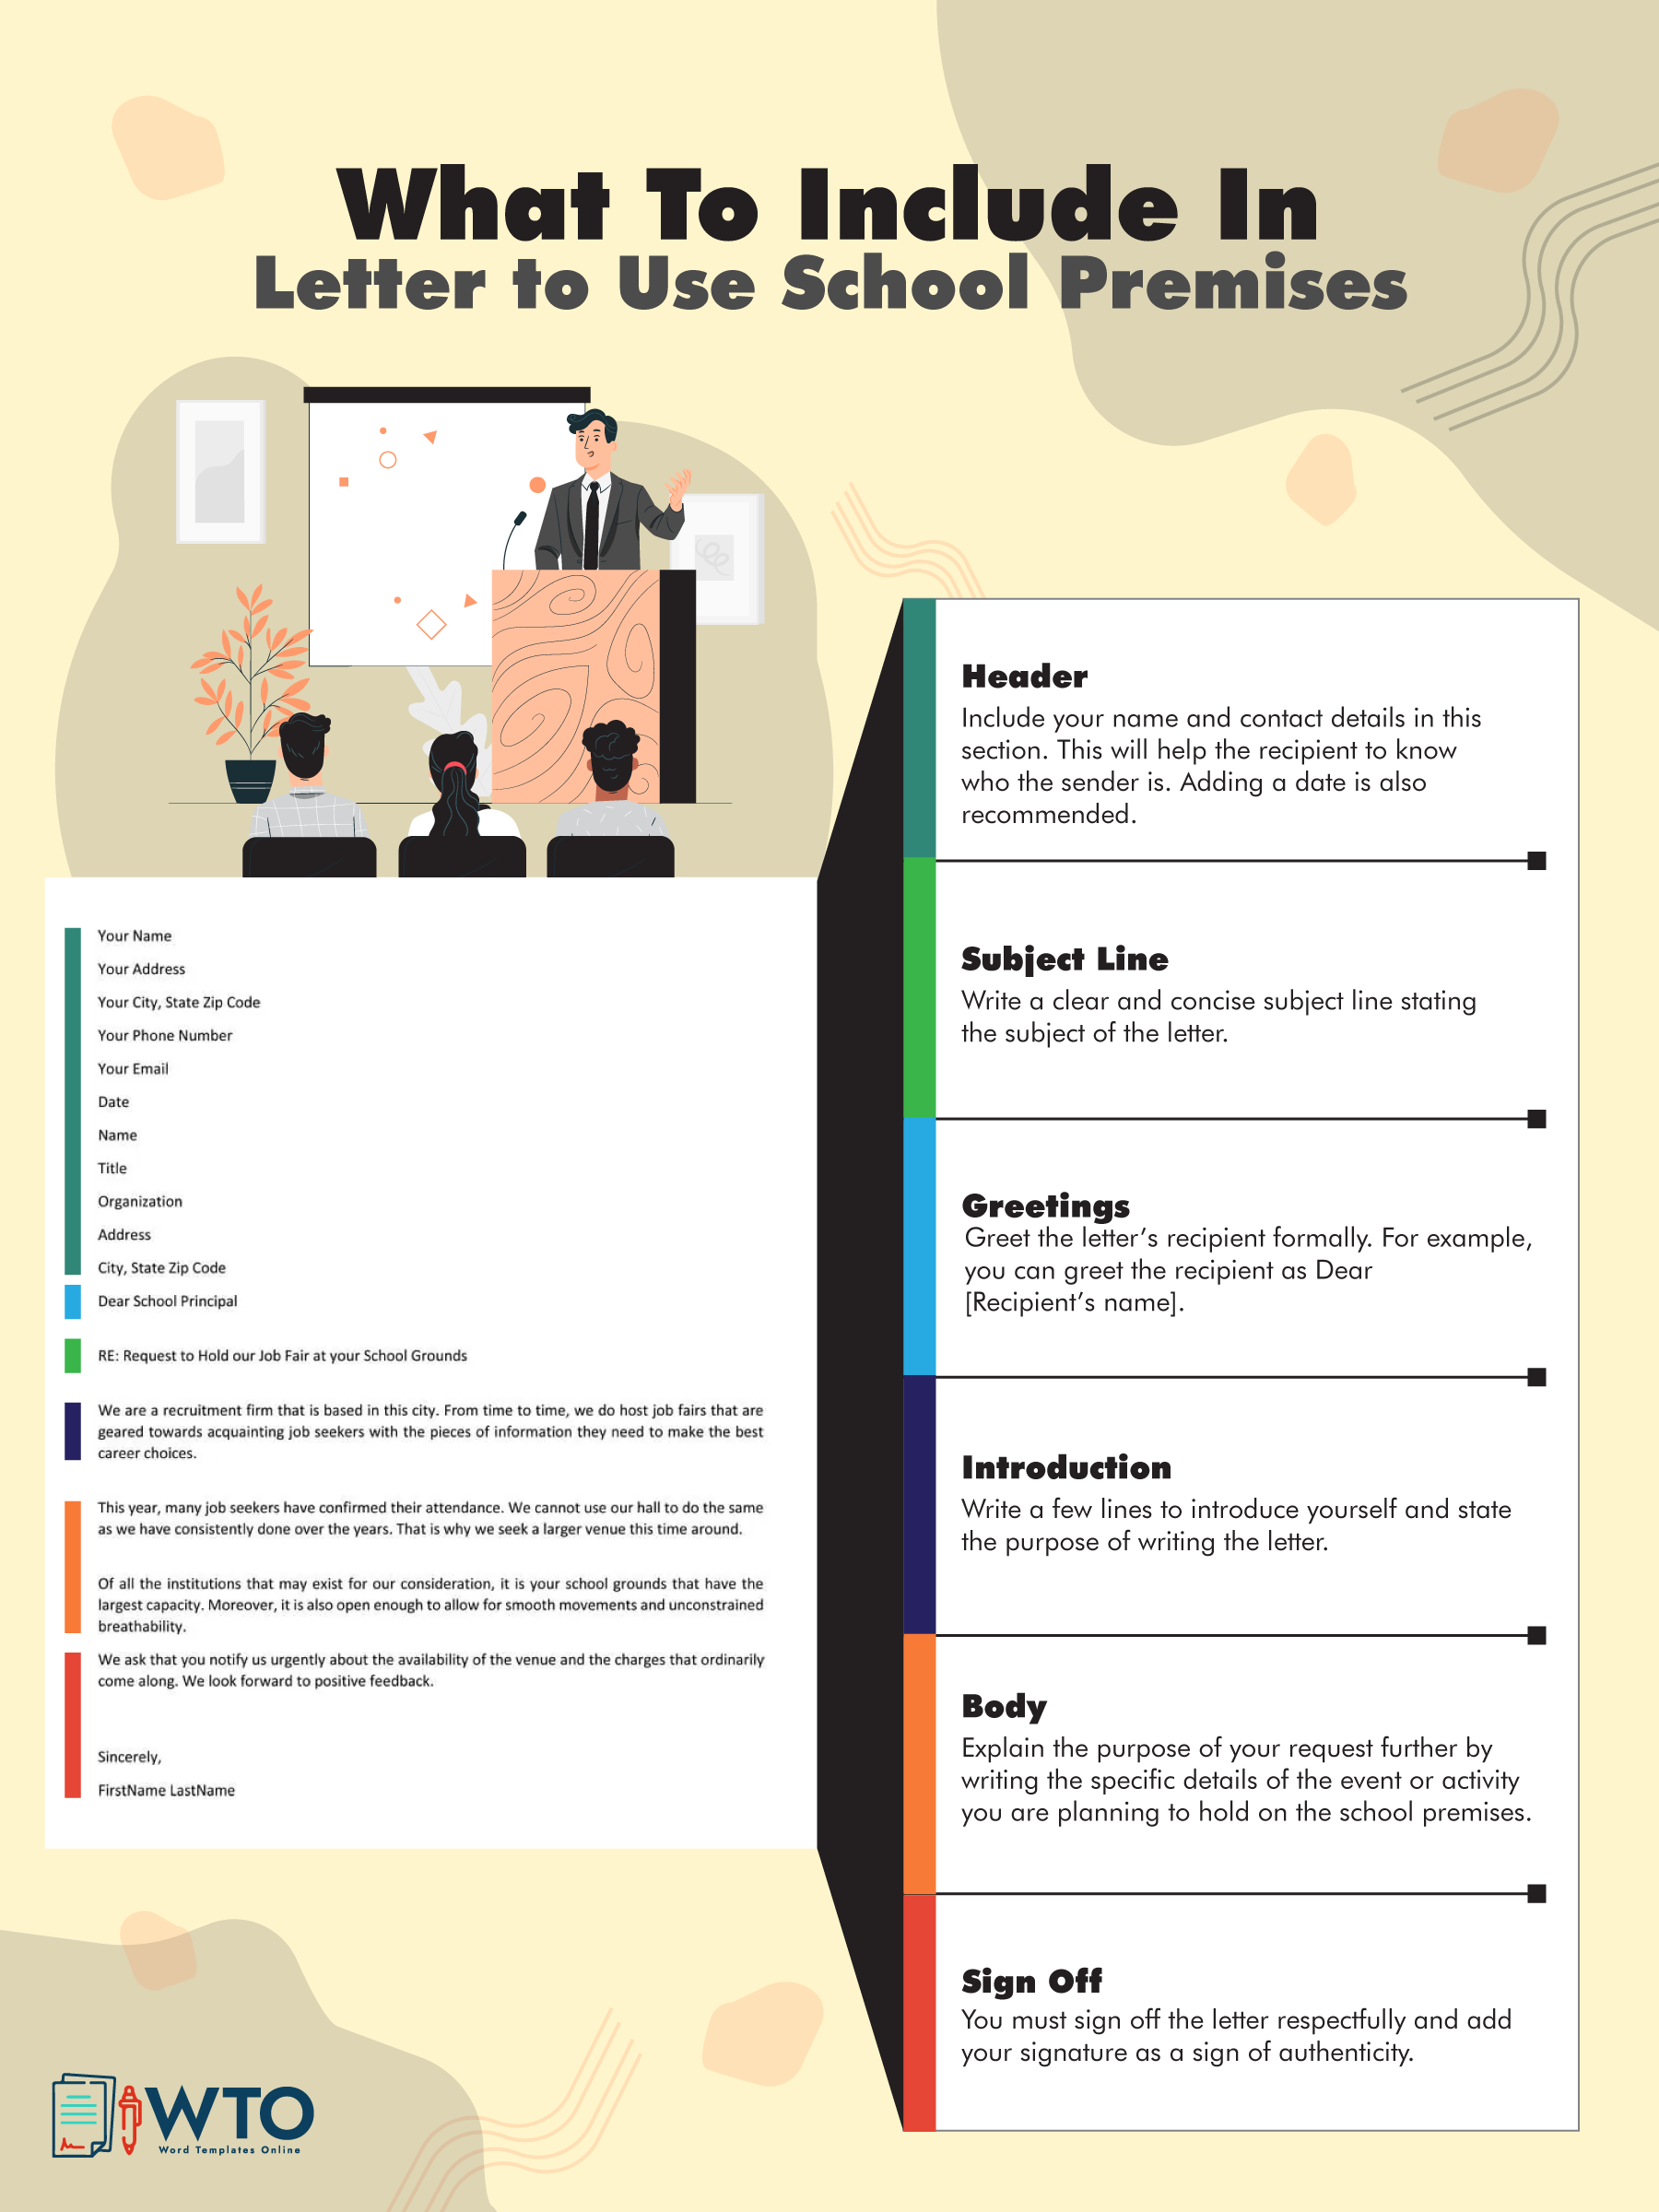 This infographic tells what to include in letter to use school premises.